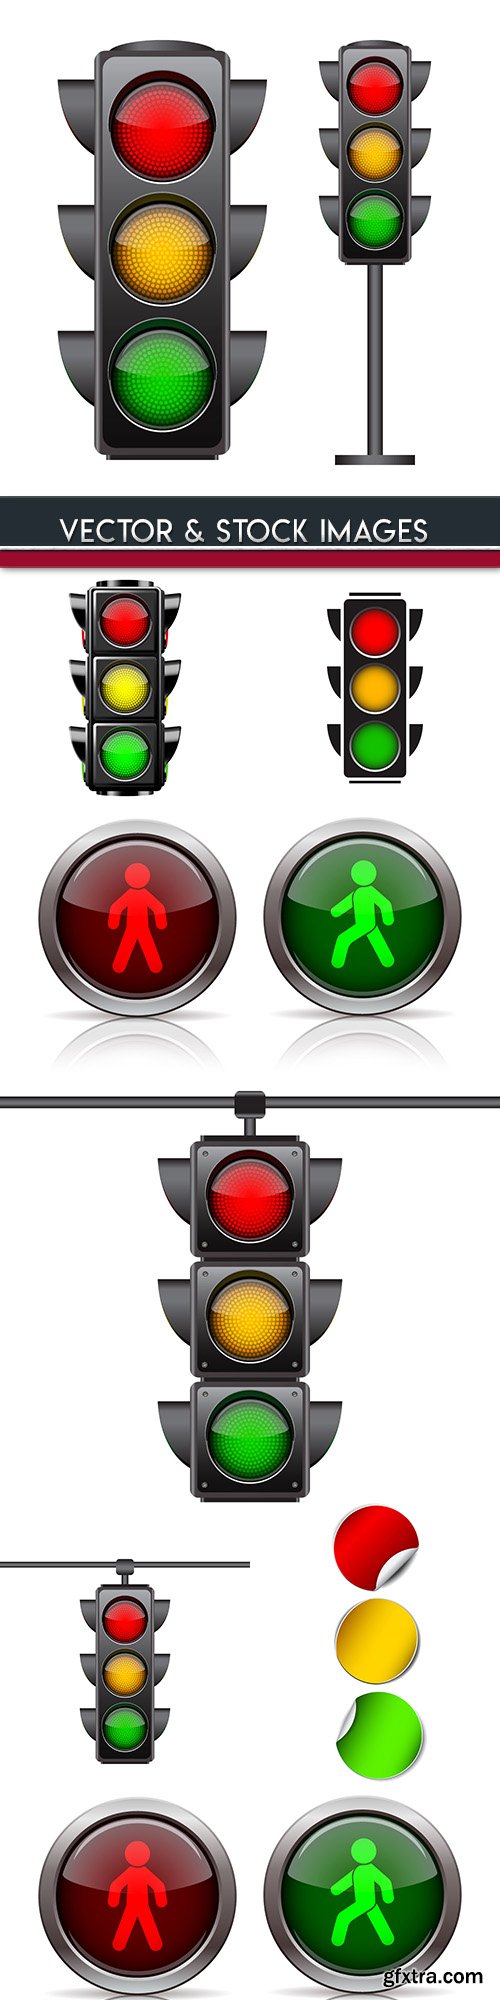 Traffic light and road signs 3d illustrations